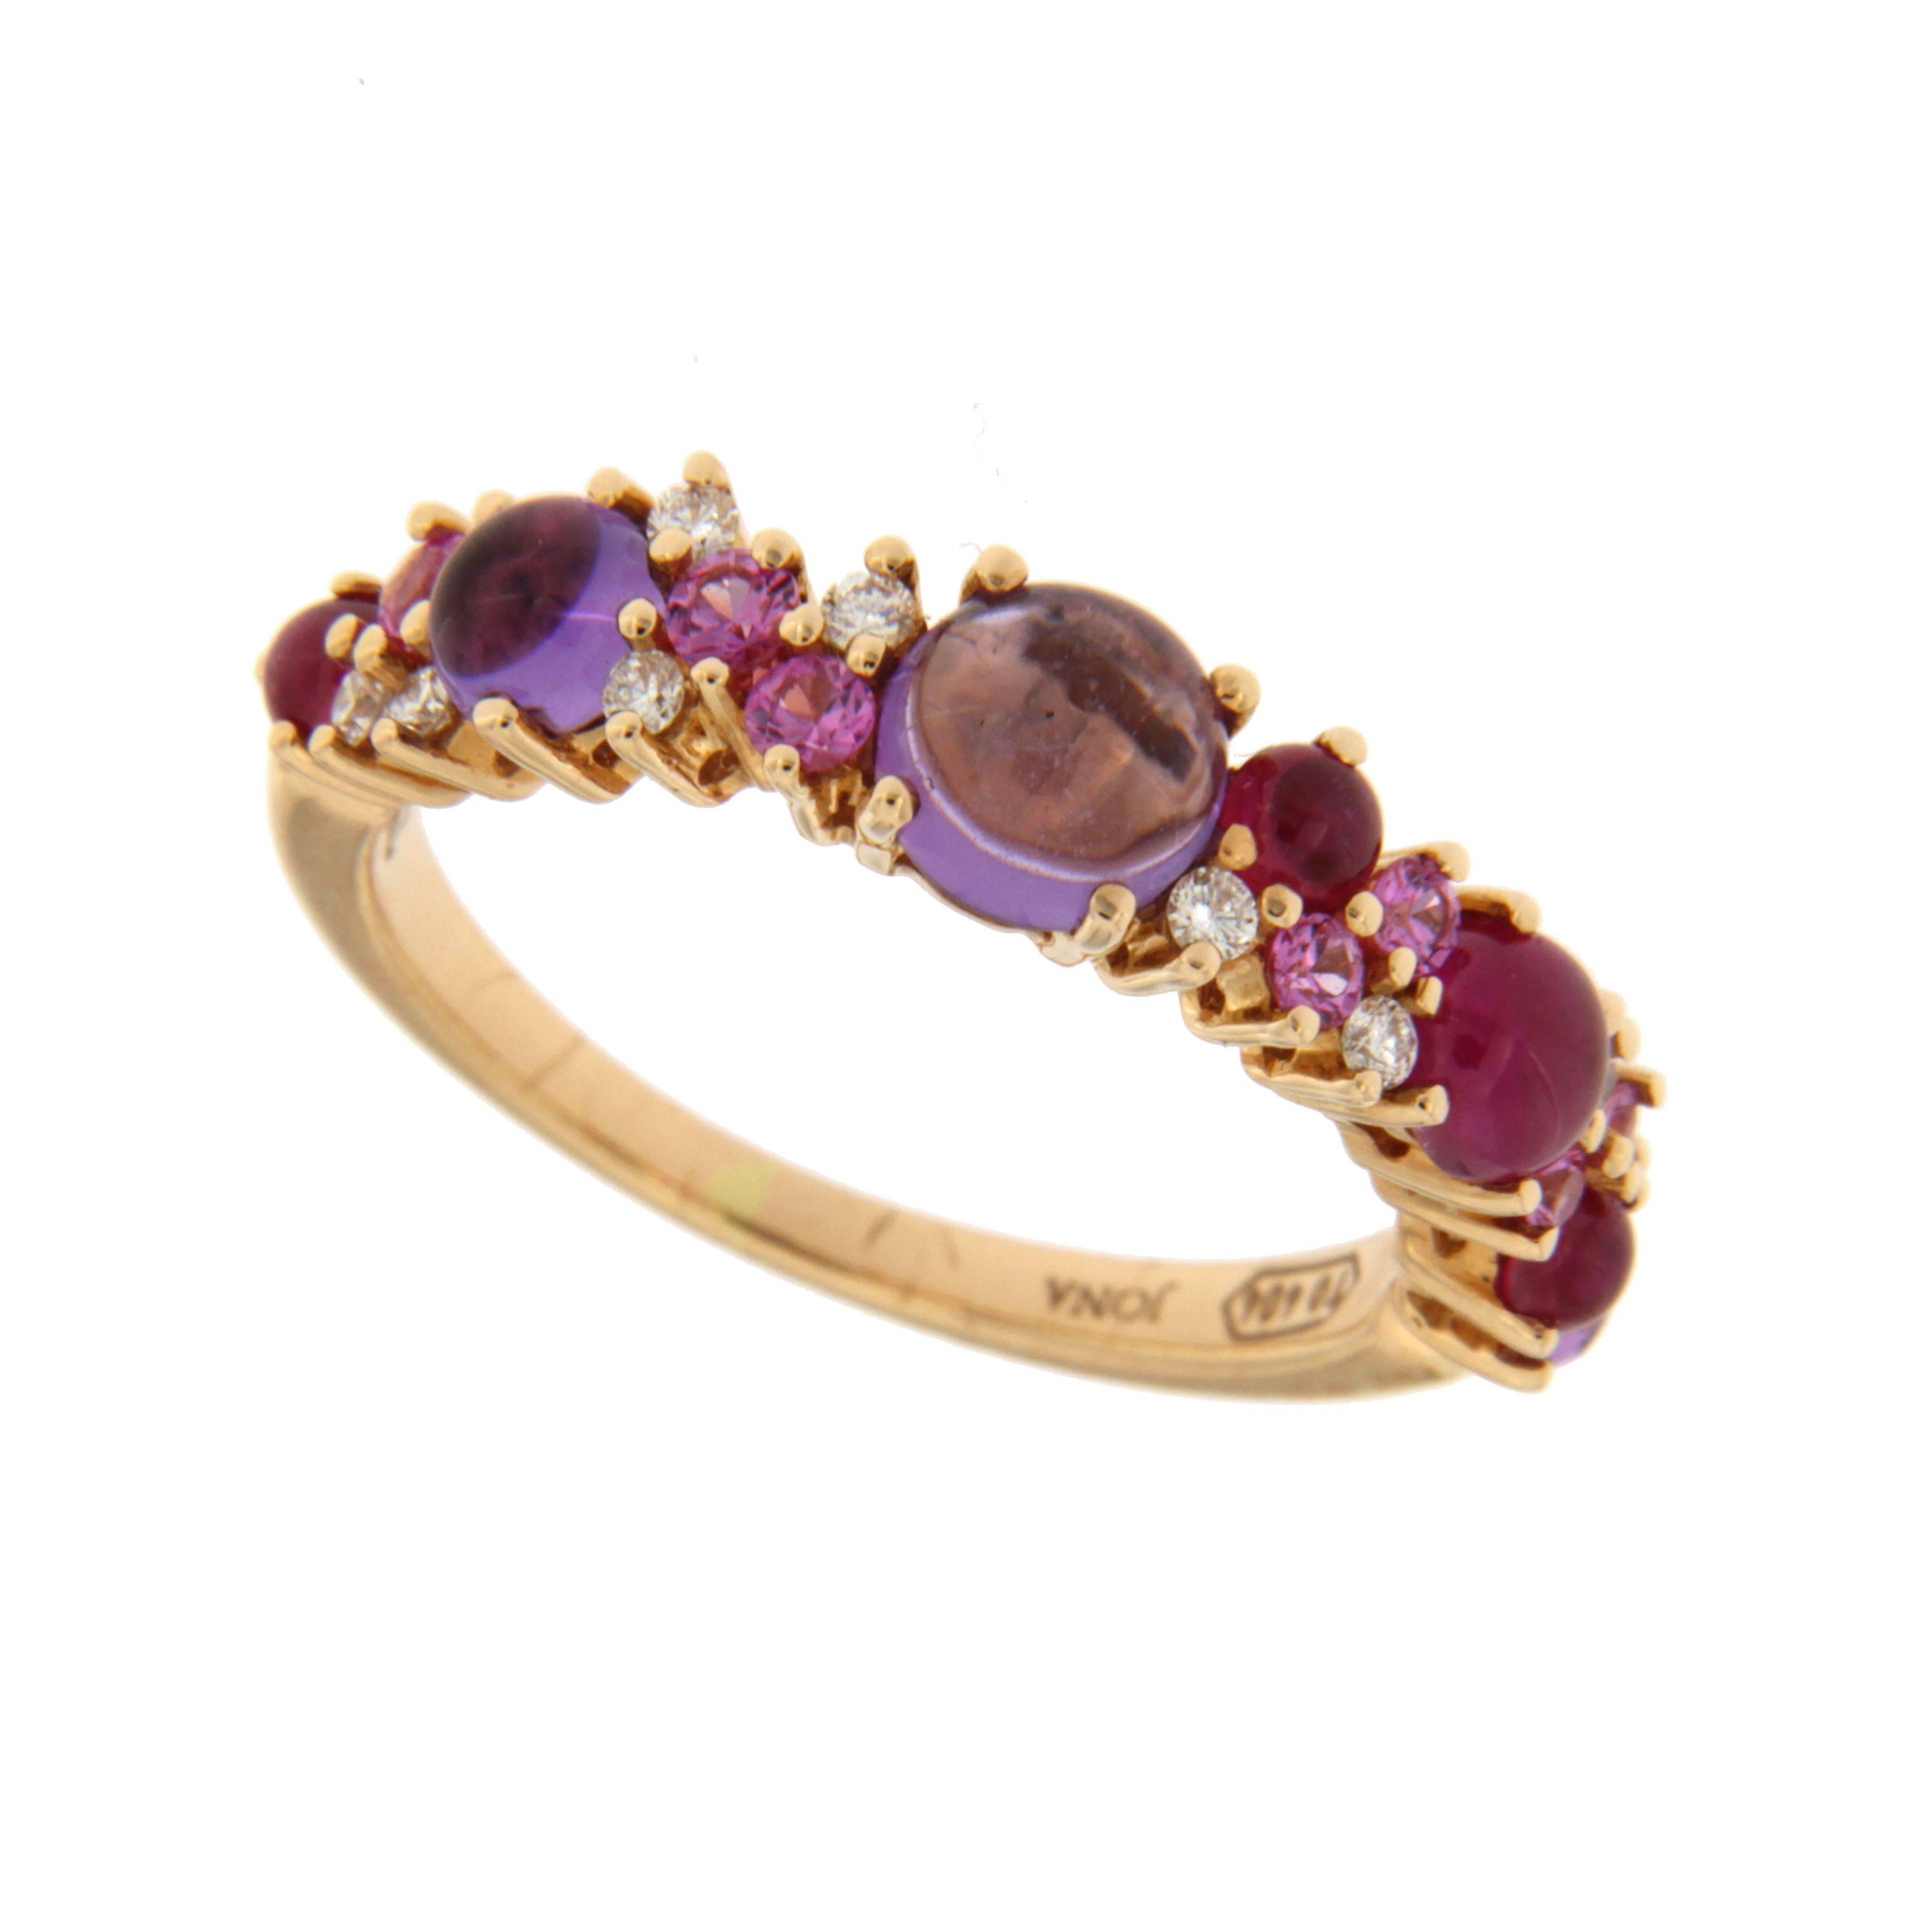 Jona design collection, hand crafted in Italy, 18 Karat rose gold ring band, set with, cabochon rubies, cabochon amethysts, pink sapphires and 0.12 carats of white diamonds. Size: US 6/ EU 12. Can be sized to any specification.
All Jona jewelry is